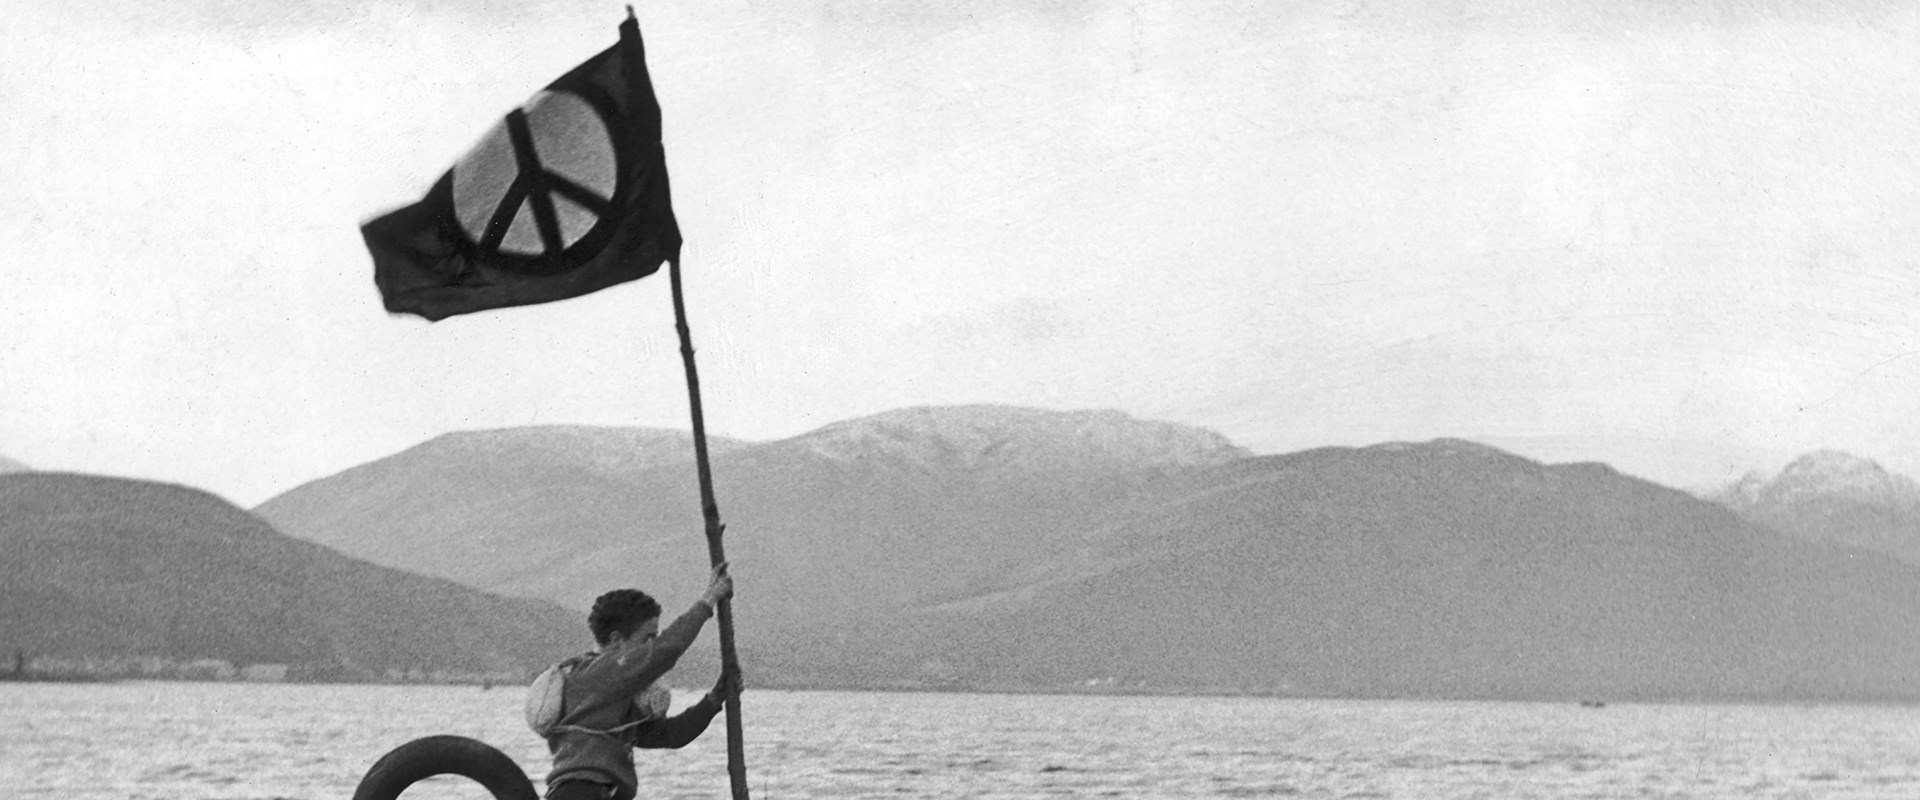 A black and white photo of a person holding a flag who is standing on a submarine which is at the surface of a loch.